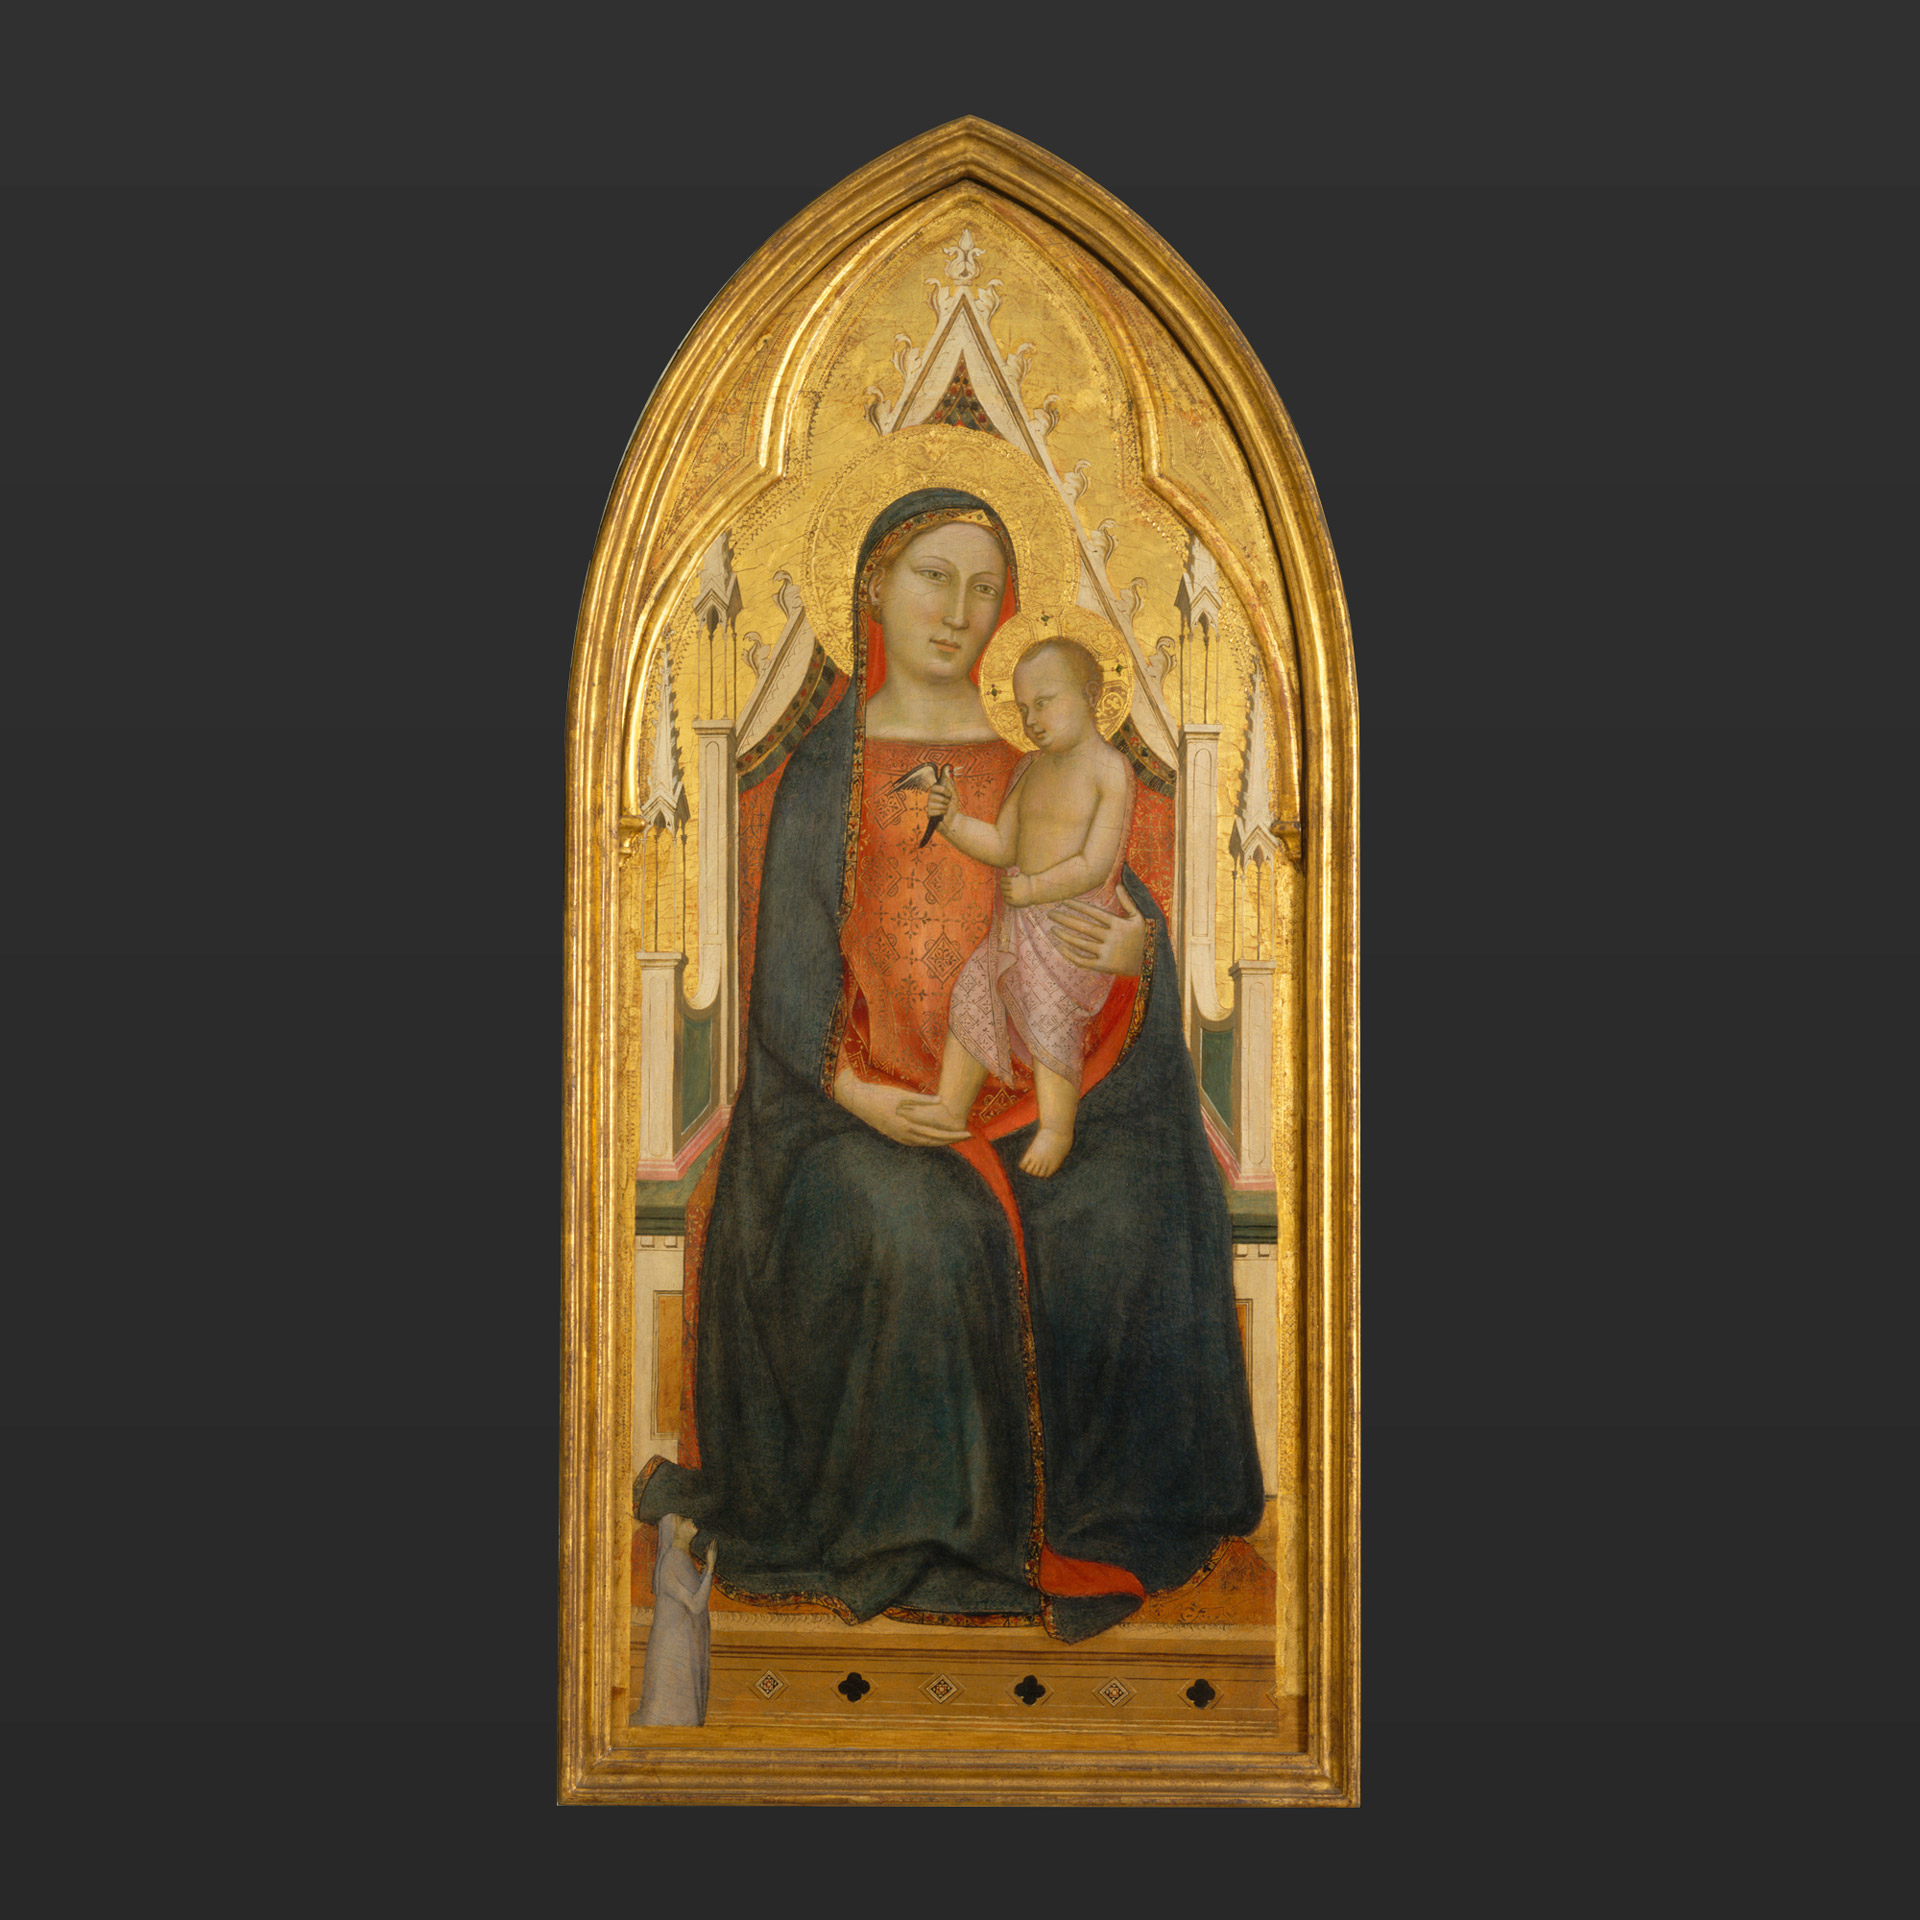 Object of the Week: Virgin and Child with Donor